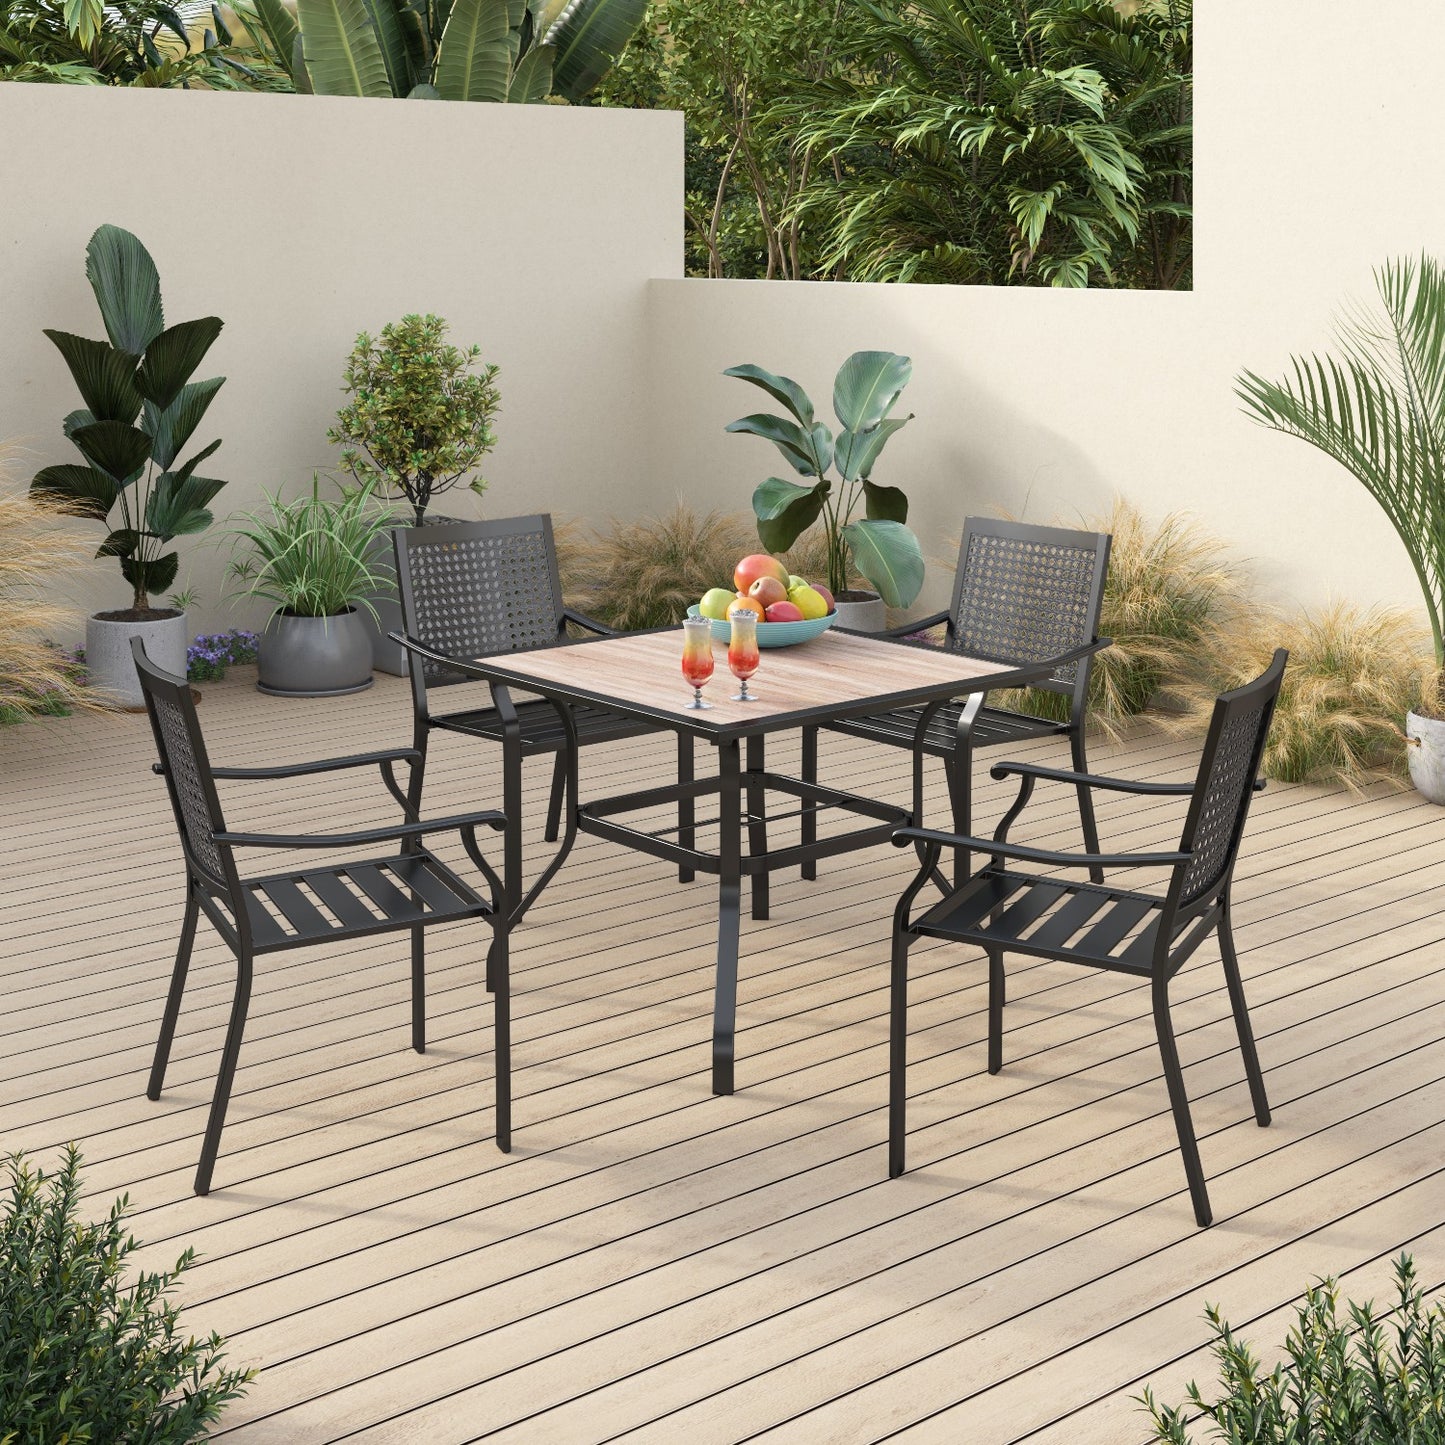 Sophia&William 5 Pieces Patio Dining Set Metal Stackable Chairs and Table,Black